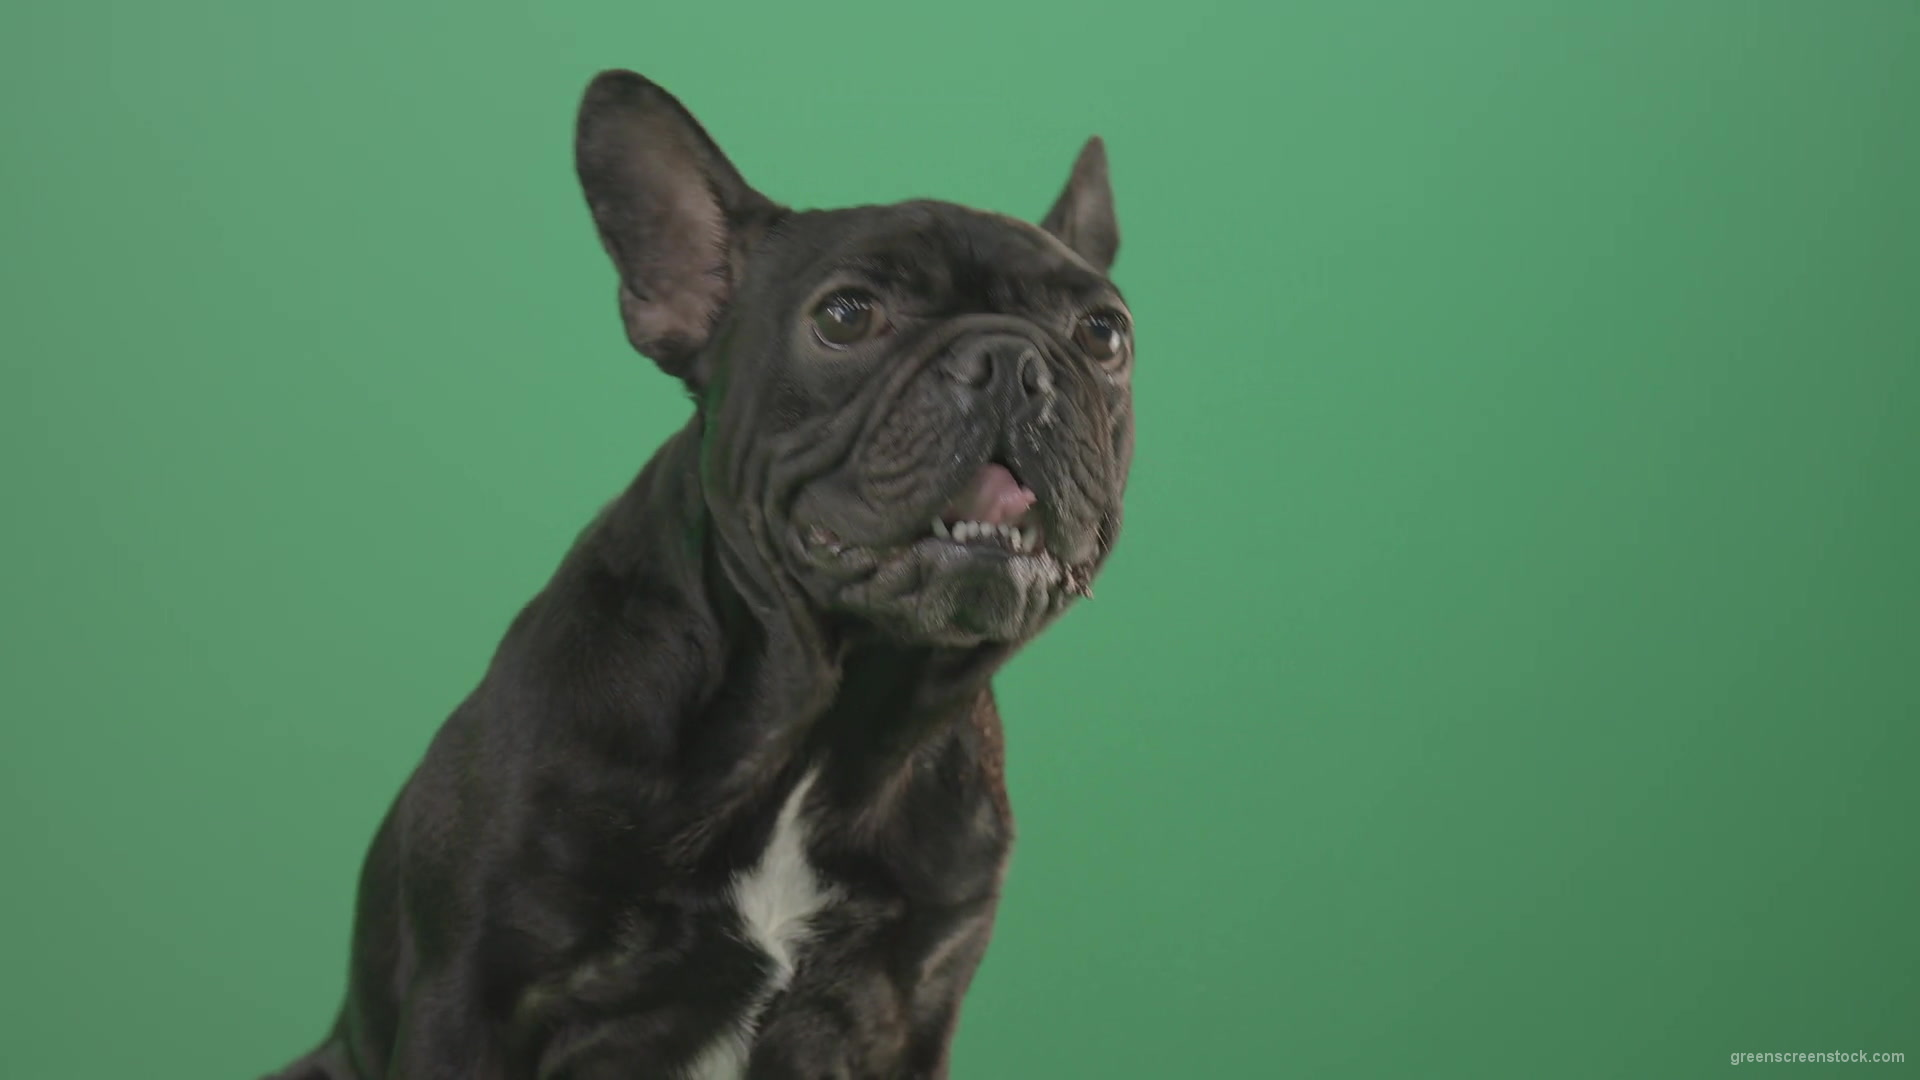 Face-portrait-of-scared-french-bulldog-toy-dog-isolated-on-green-screen-1920_009 Green Screen Stock